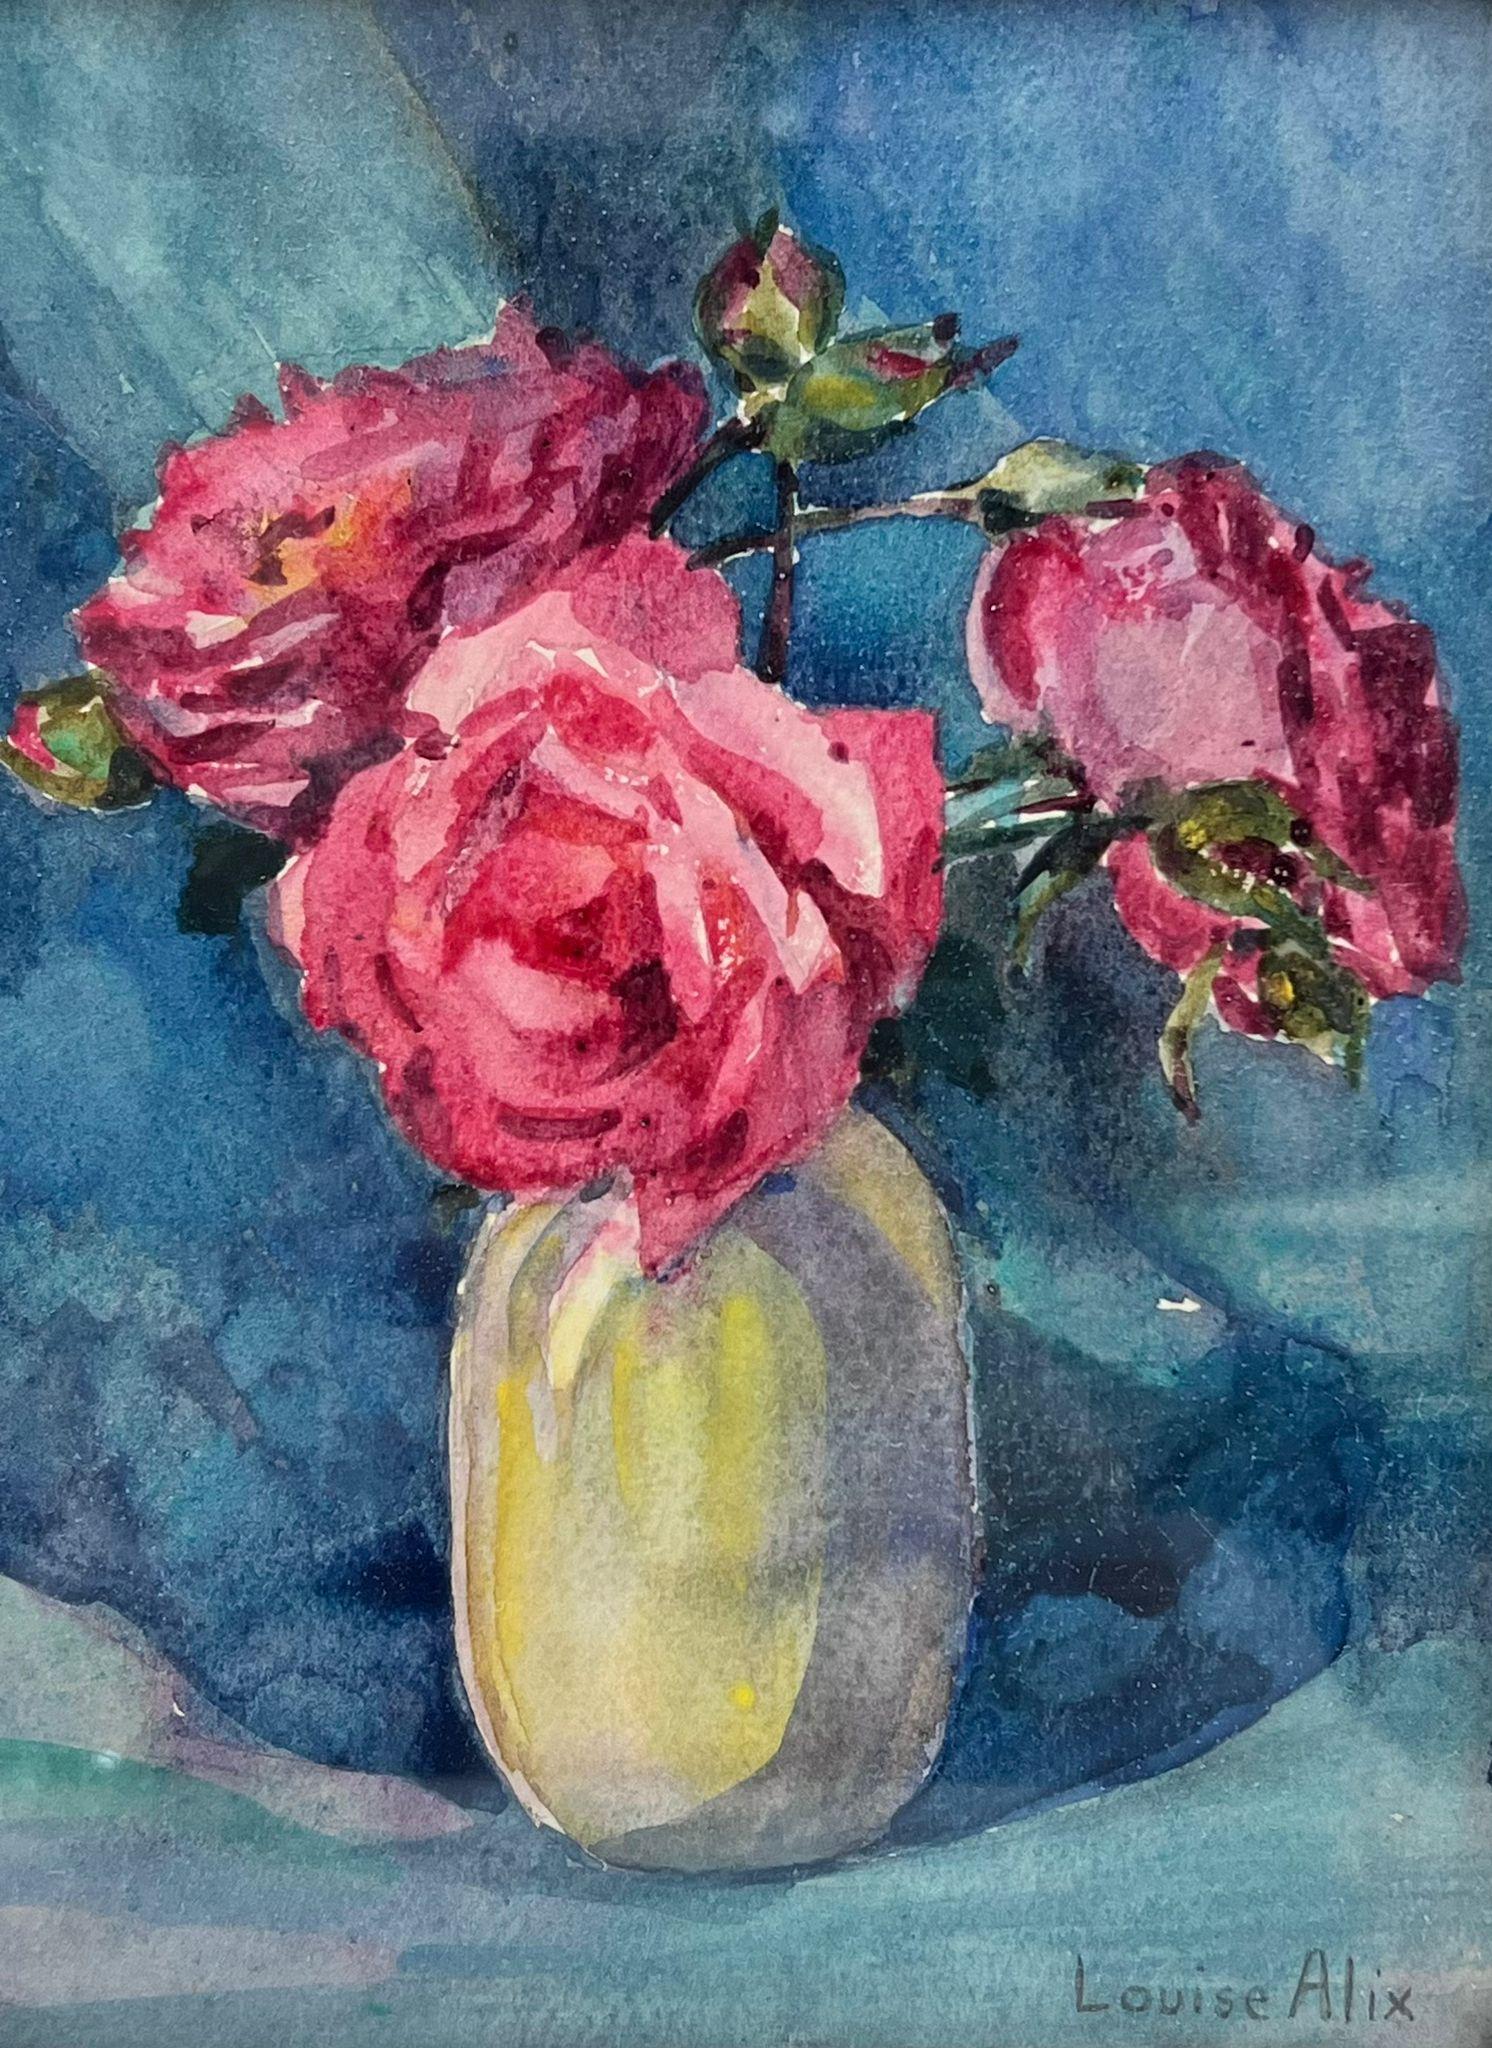 Vintage French Impressionist Pink Roses In White Colour Vase Blue Interior - Painting by Louise Alix